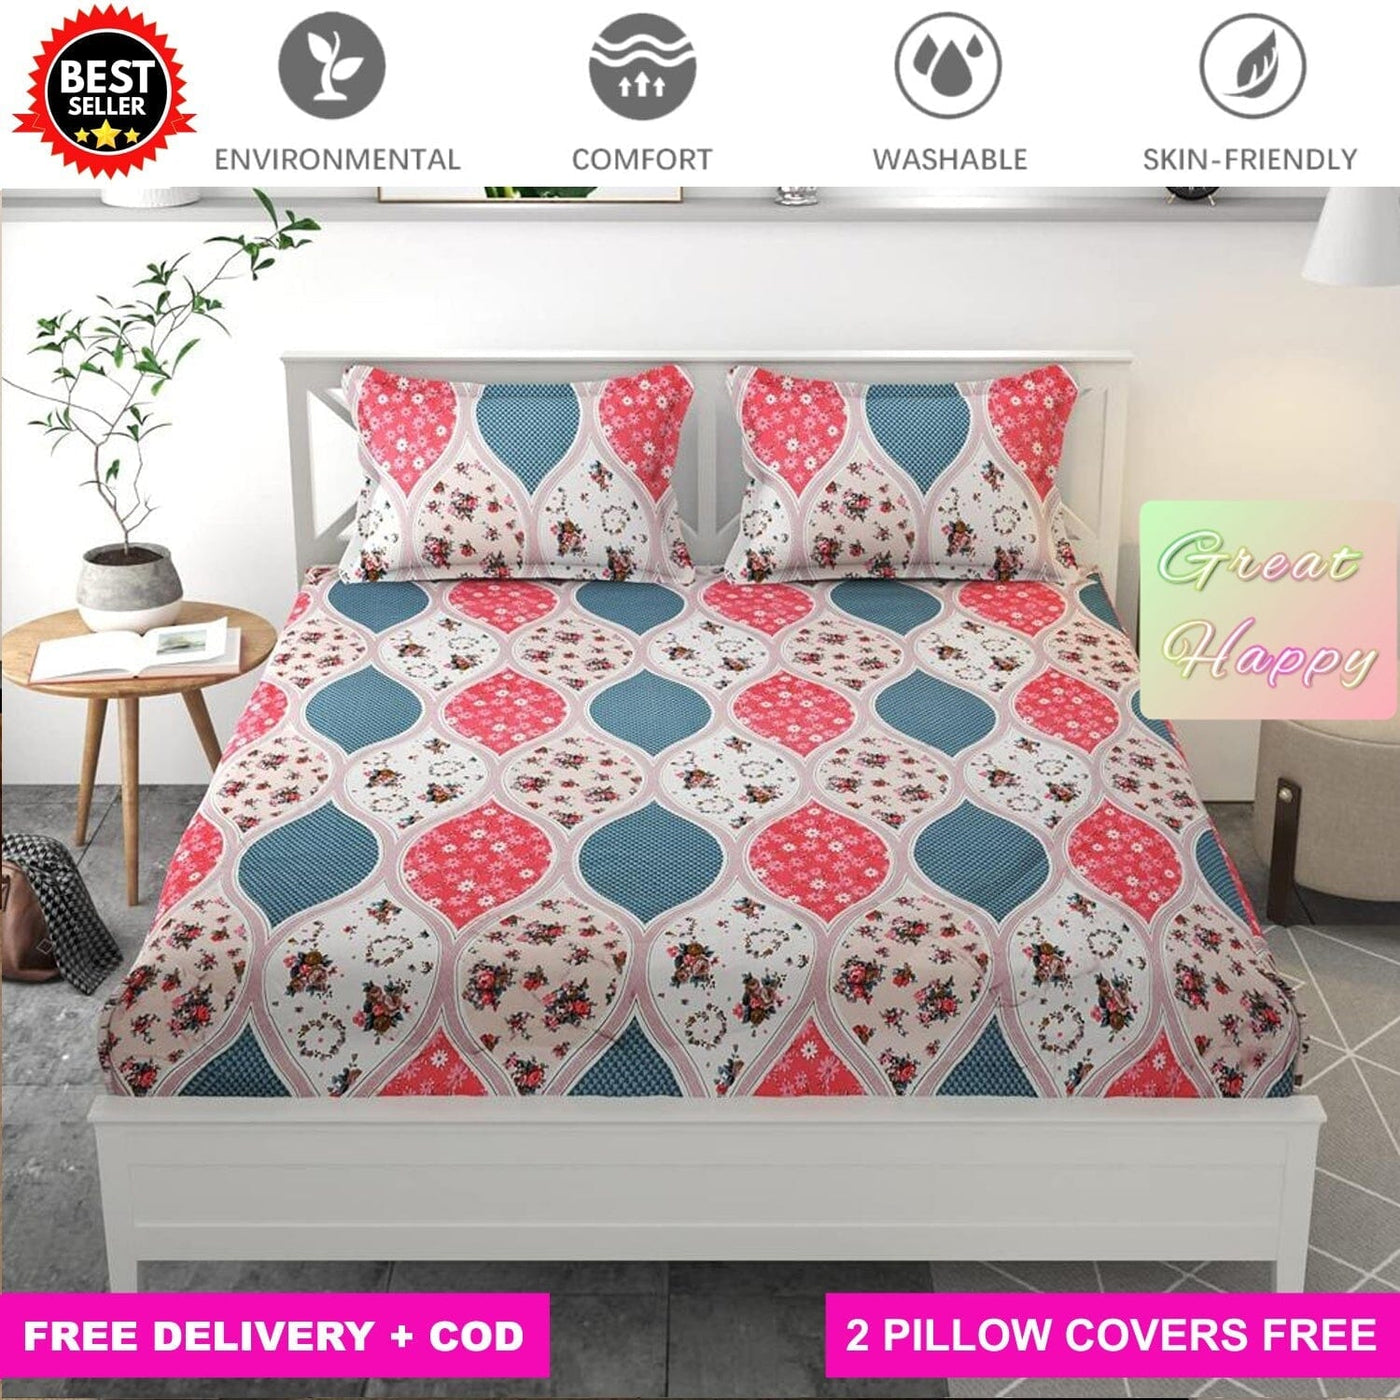 White Red Floral Full Elastic Fitted Bedsheet with 2 Pillow Covers Bed Sheets Great Happy IN KING SIZE - ₹1299 